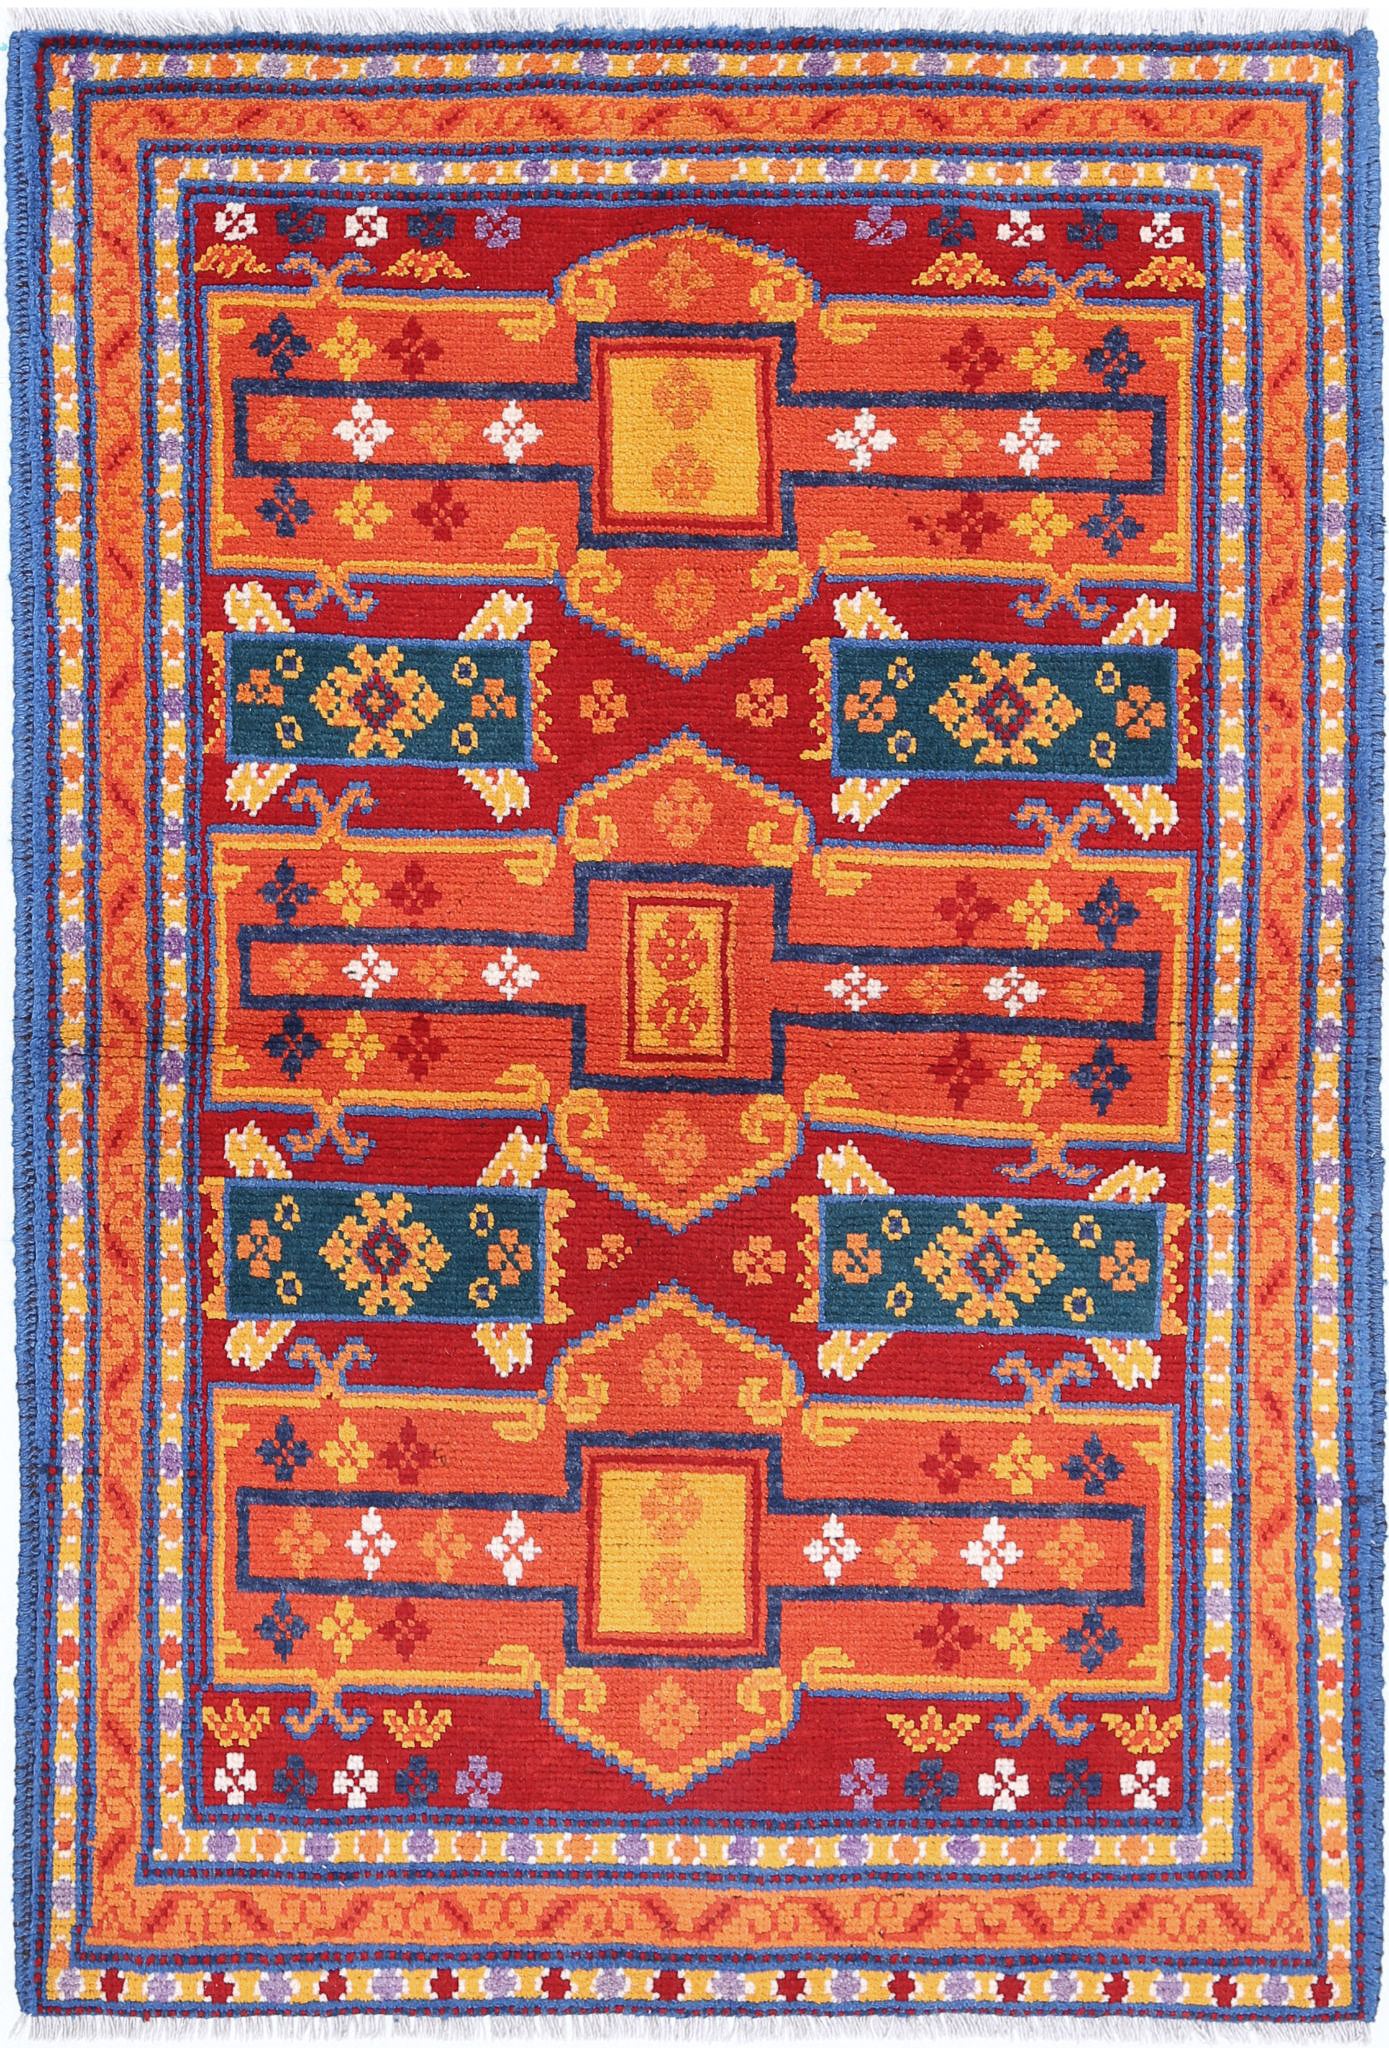 Revival-hand-knotted-qarghani-wool-rug-5014043.jpg